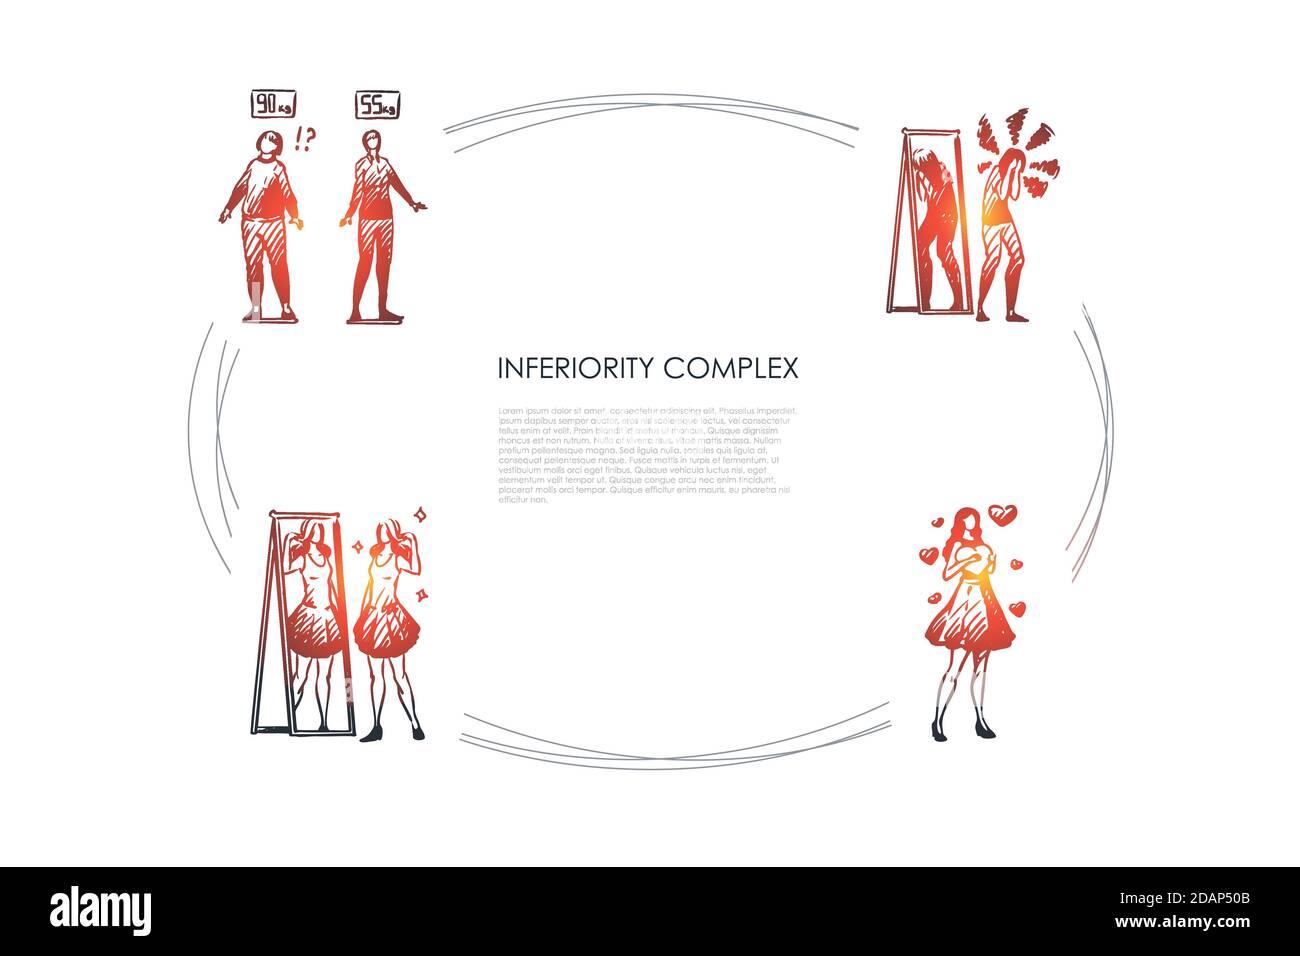 Inferiority complex - women with inferiority complex not satisfied with weight and appearance vector concept set Stock Vector